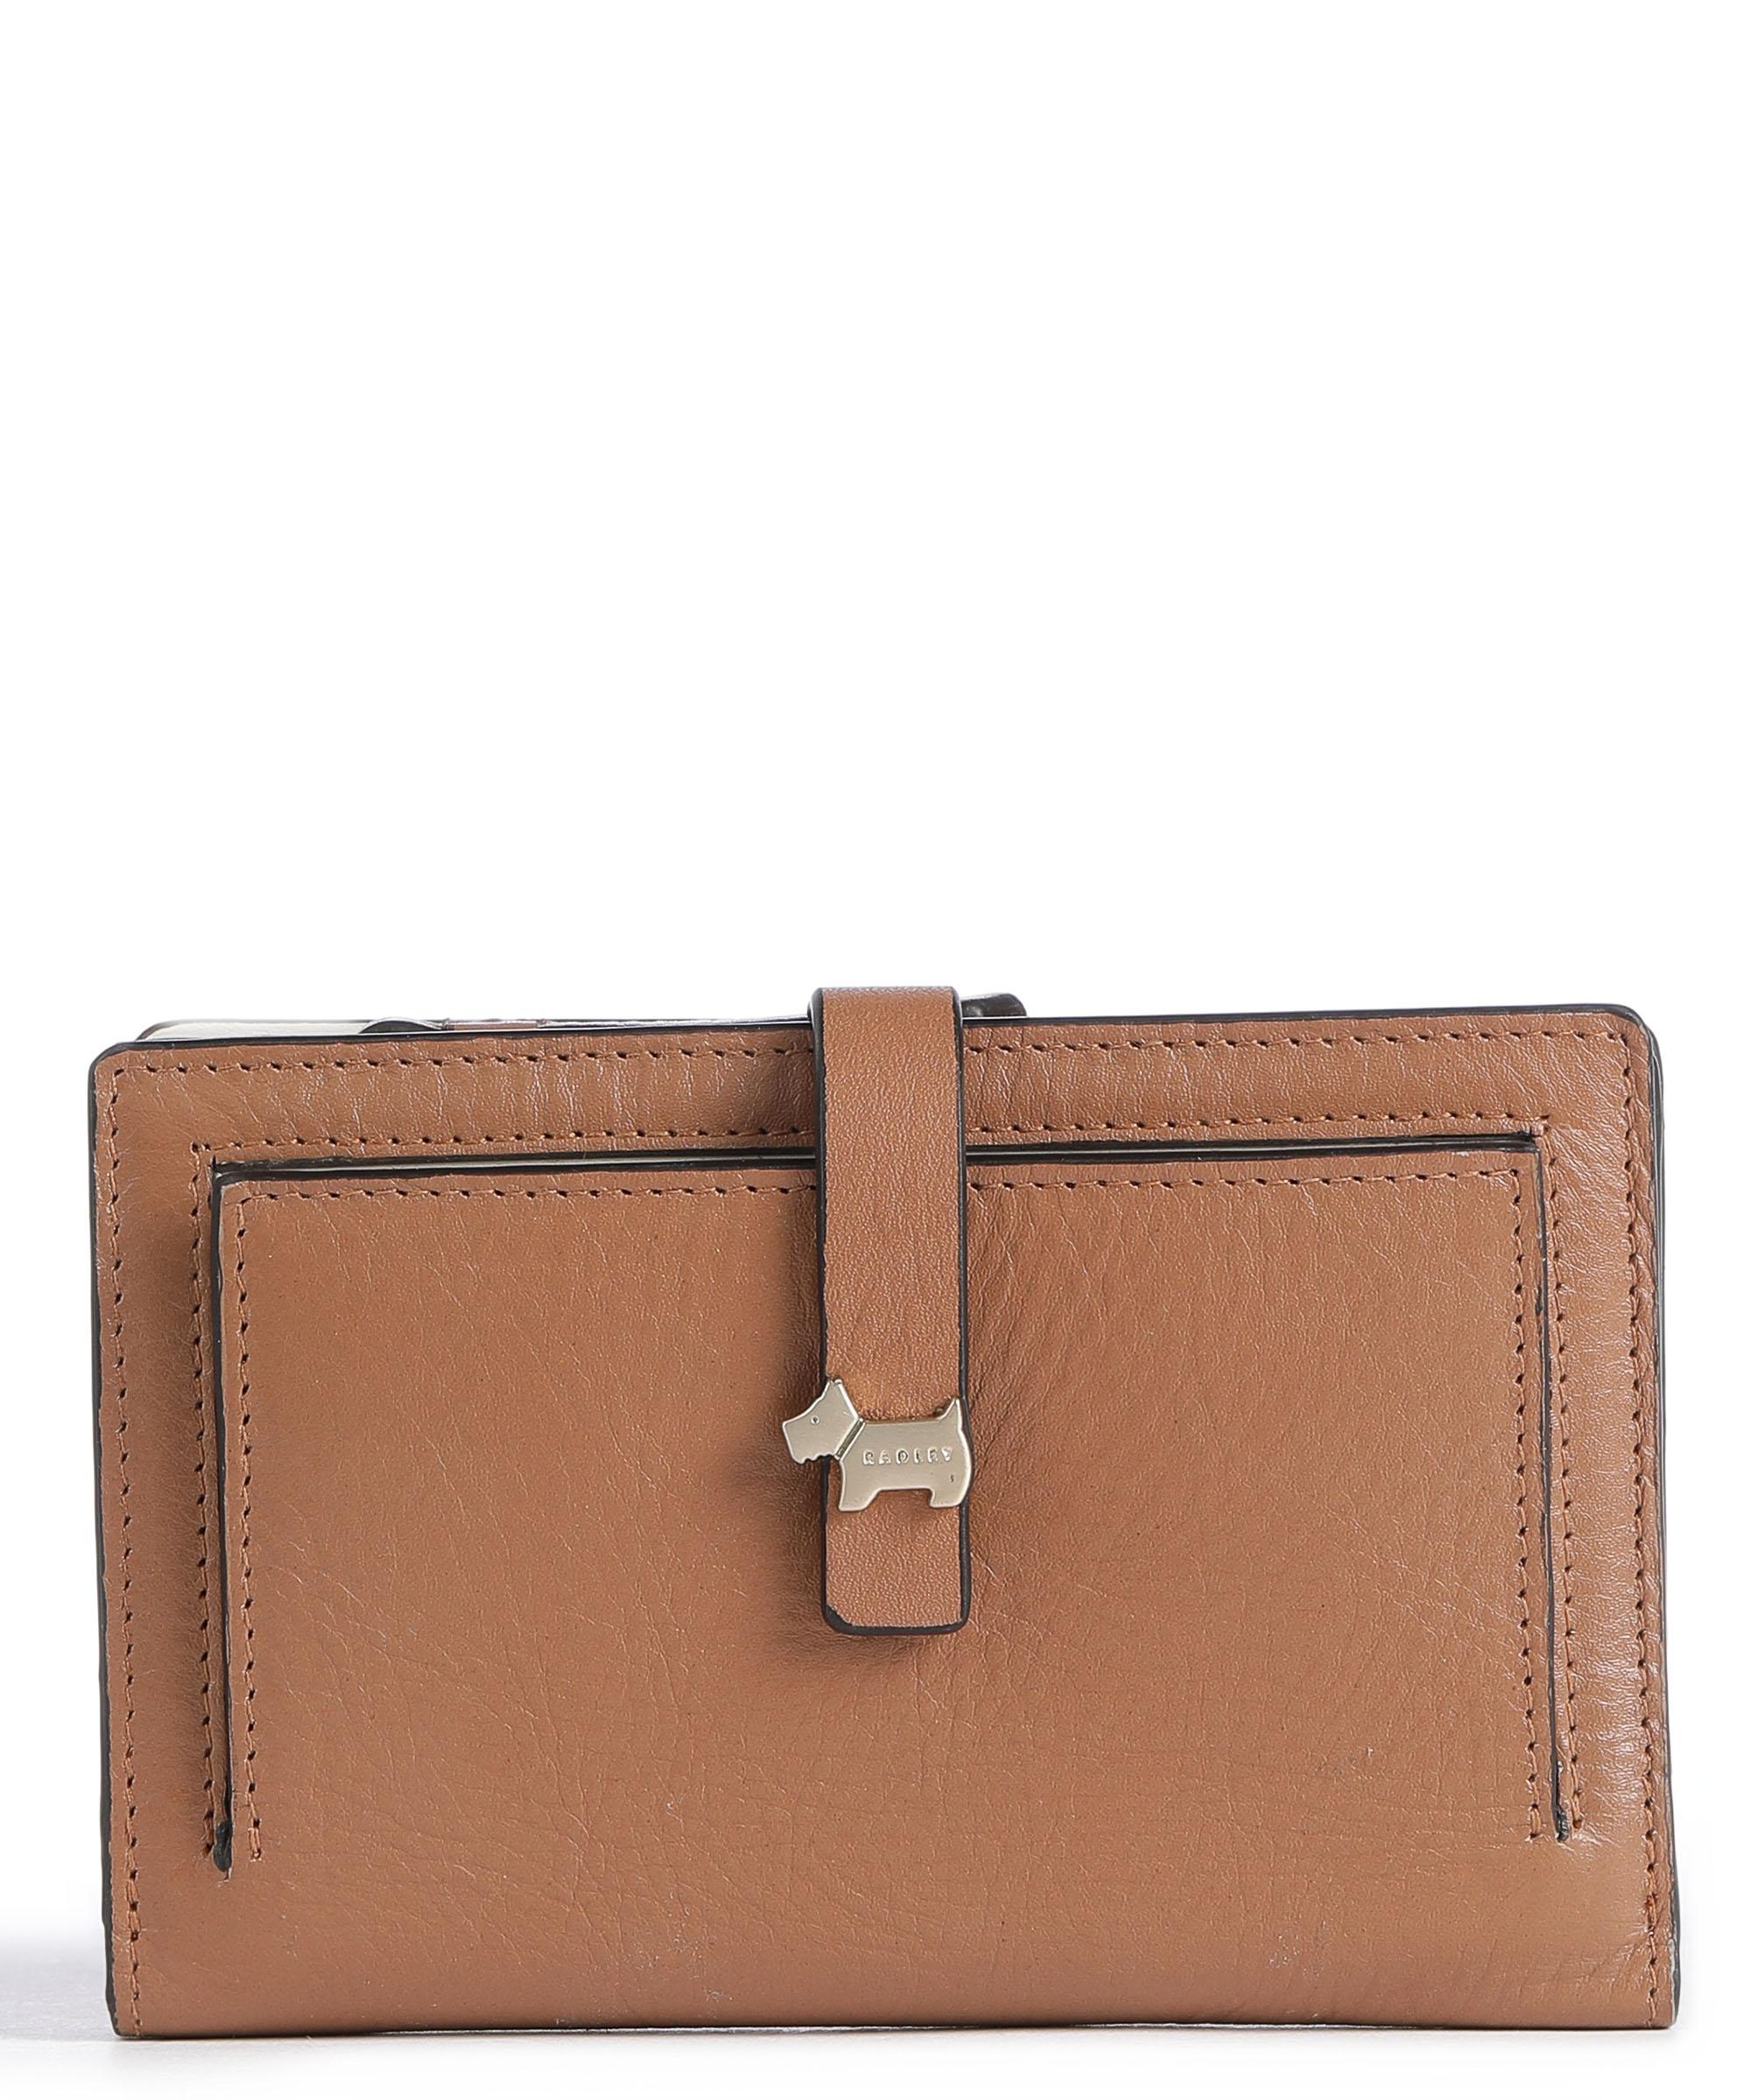 Radley London Valentines Small Leather Flapover Shoulder Bag | Westland Mall